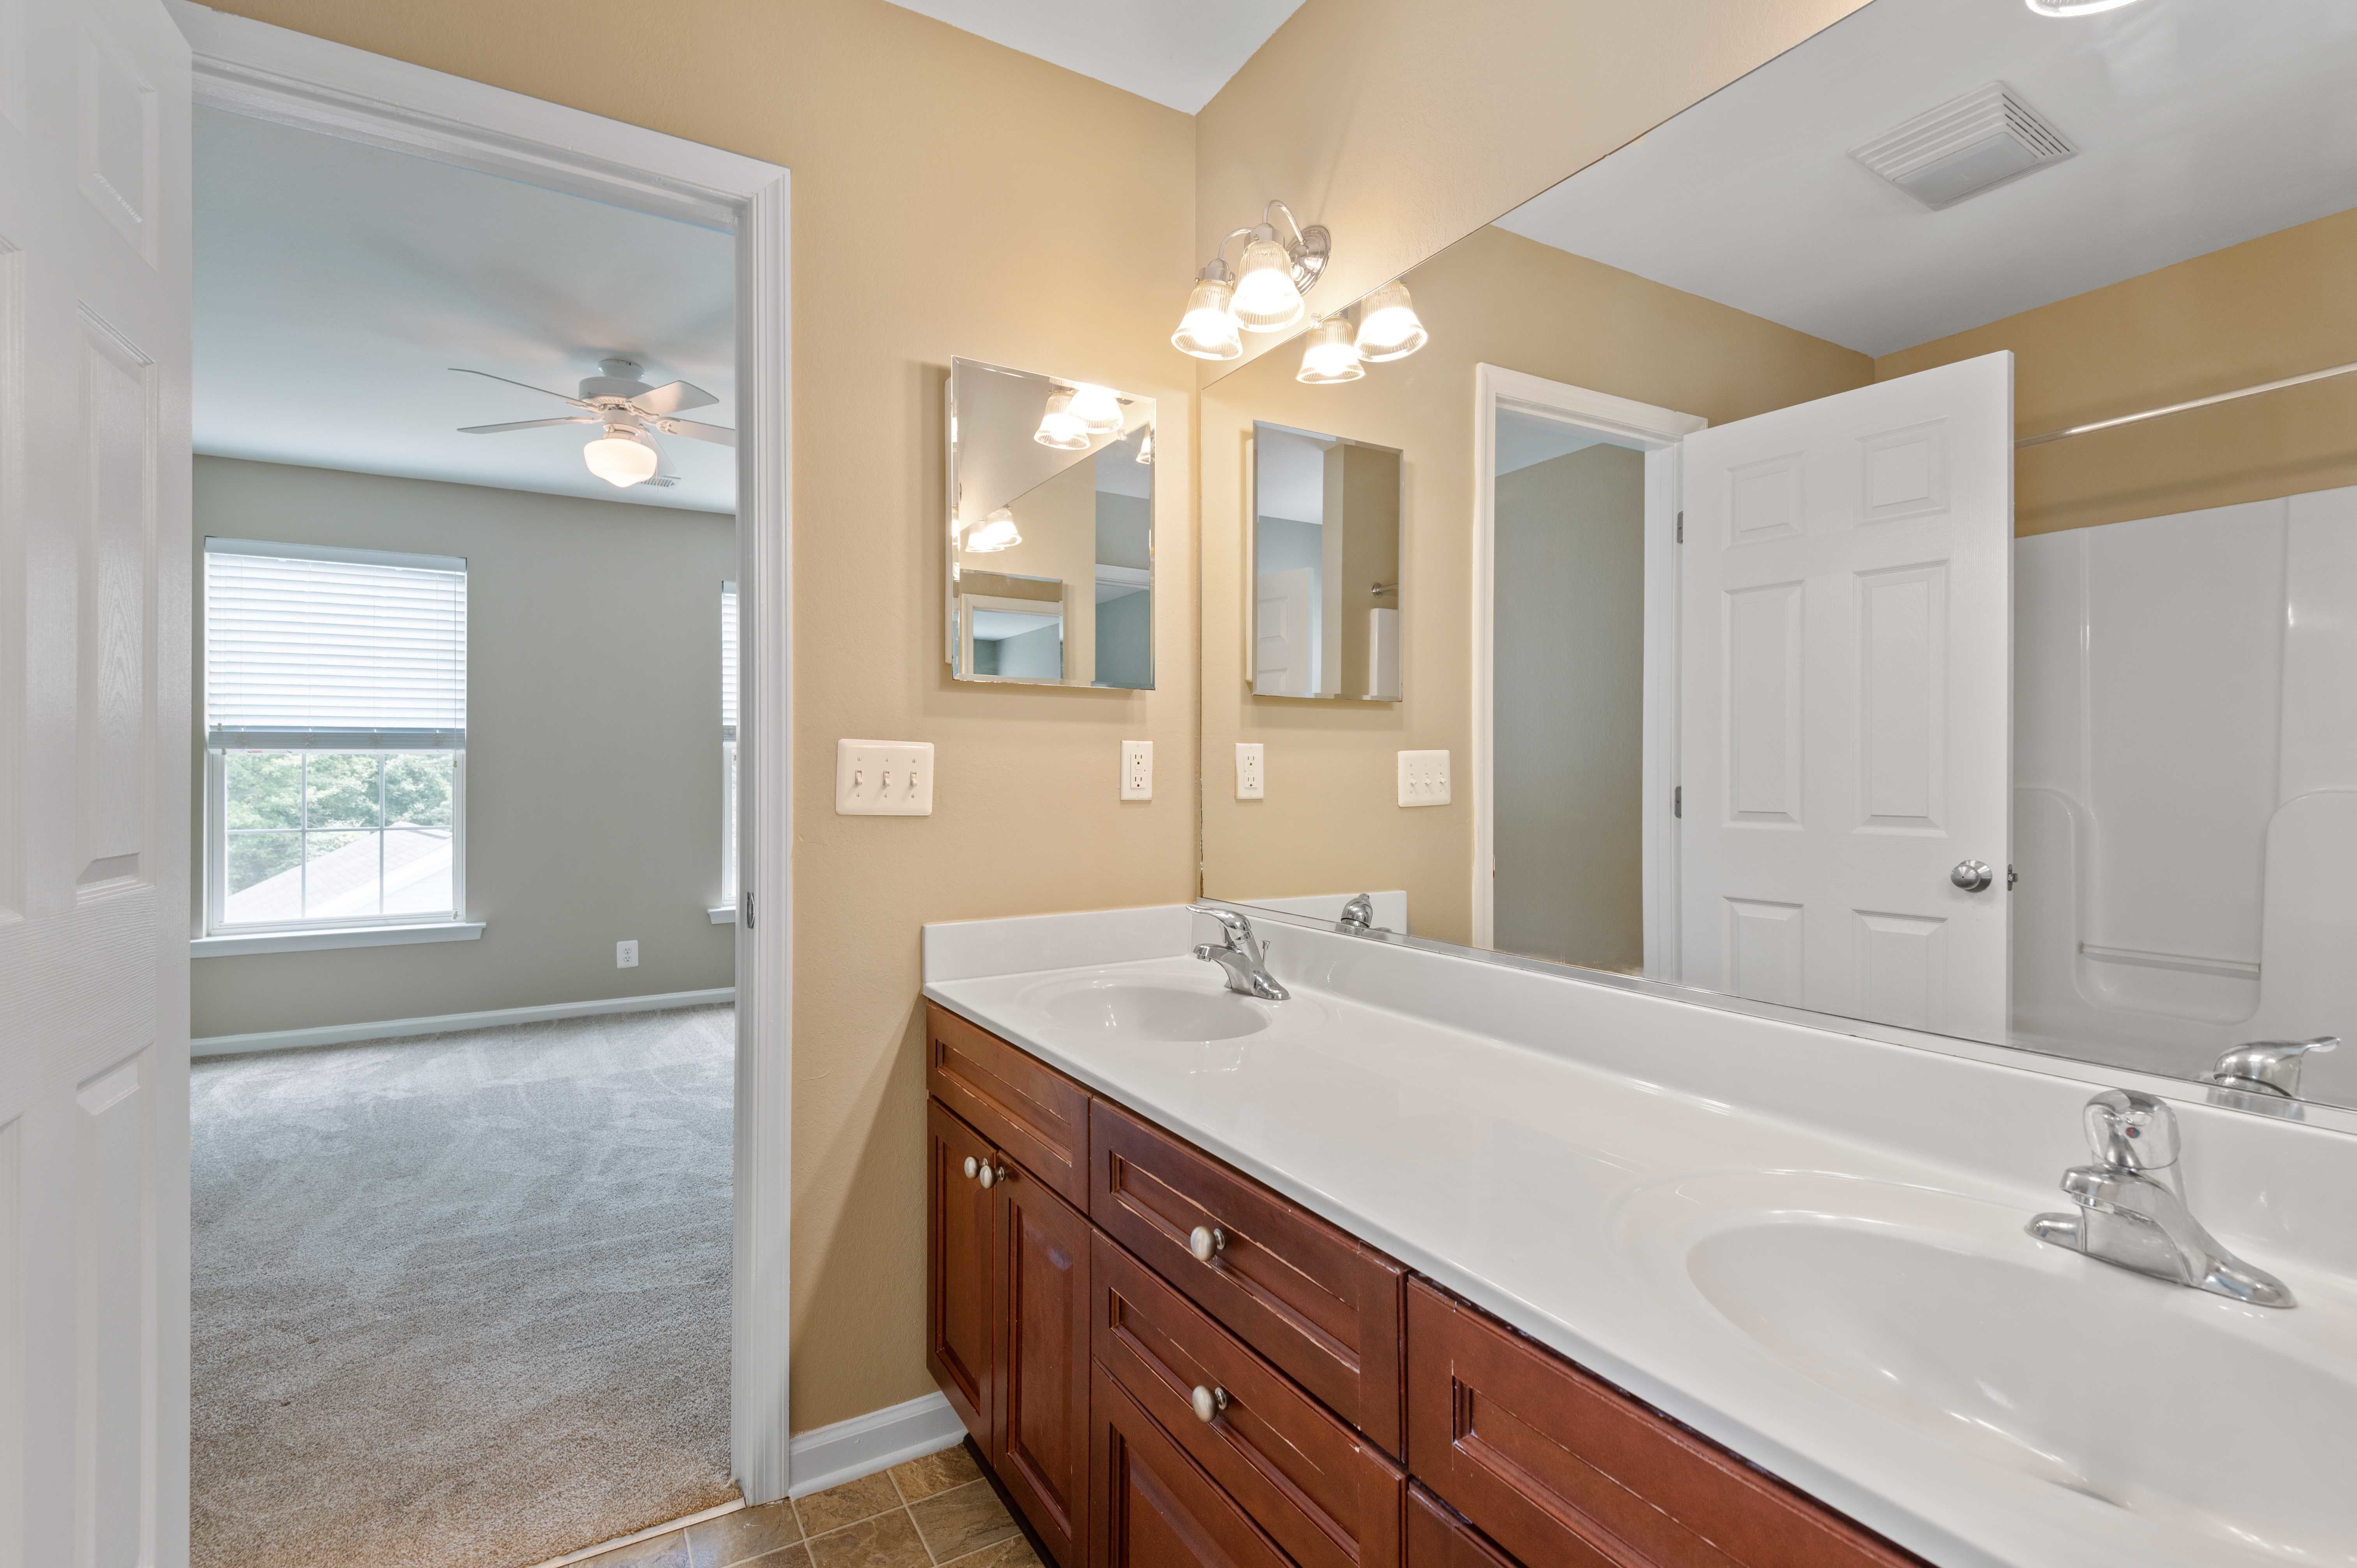 A bathroom in the main bedroom on a home at Columbia Colony in Patuxent River, Maryland